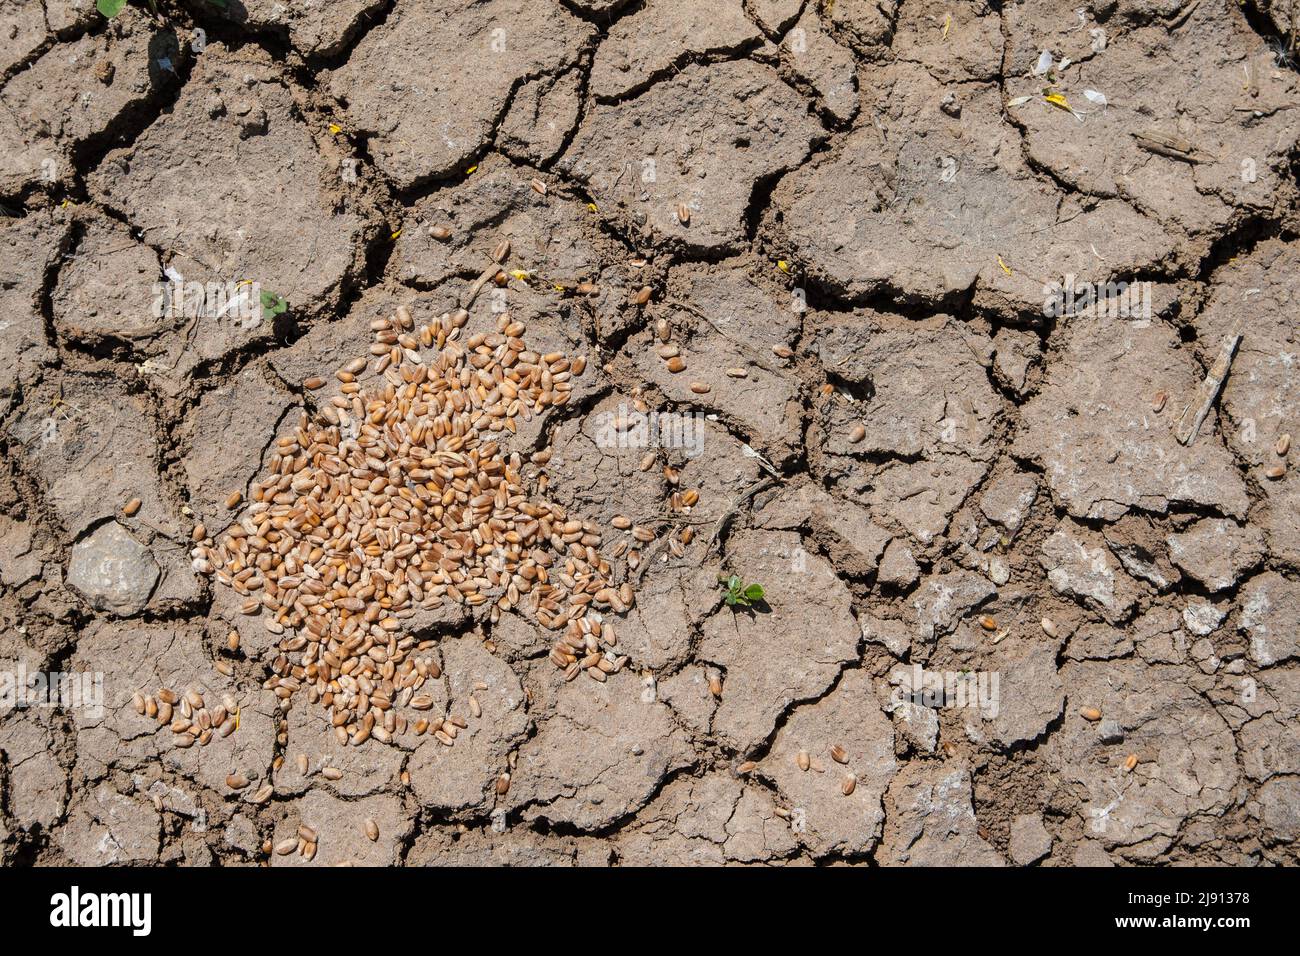 A handful of grain lies on the parched ground. Climate change affects agriculture and leads to crop losses. Grain prices are rising, threatening food Stock Photo